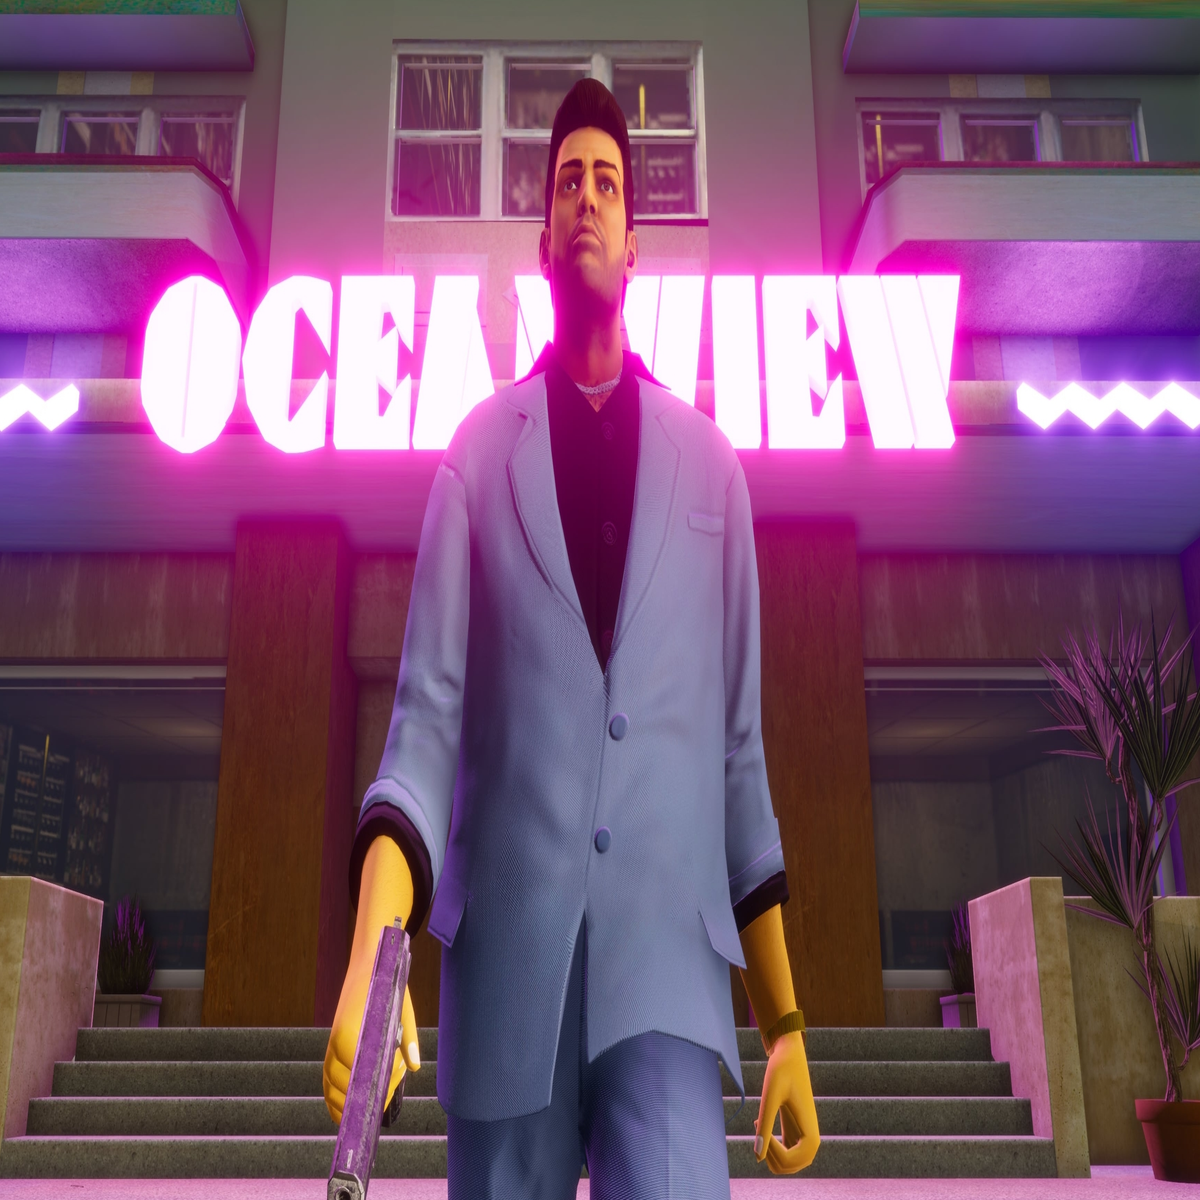 GTA Vice City Modern V2.0 adds new textures & graphical enhancements